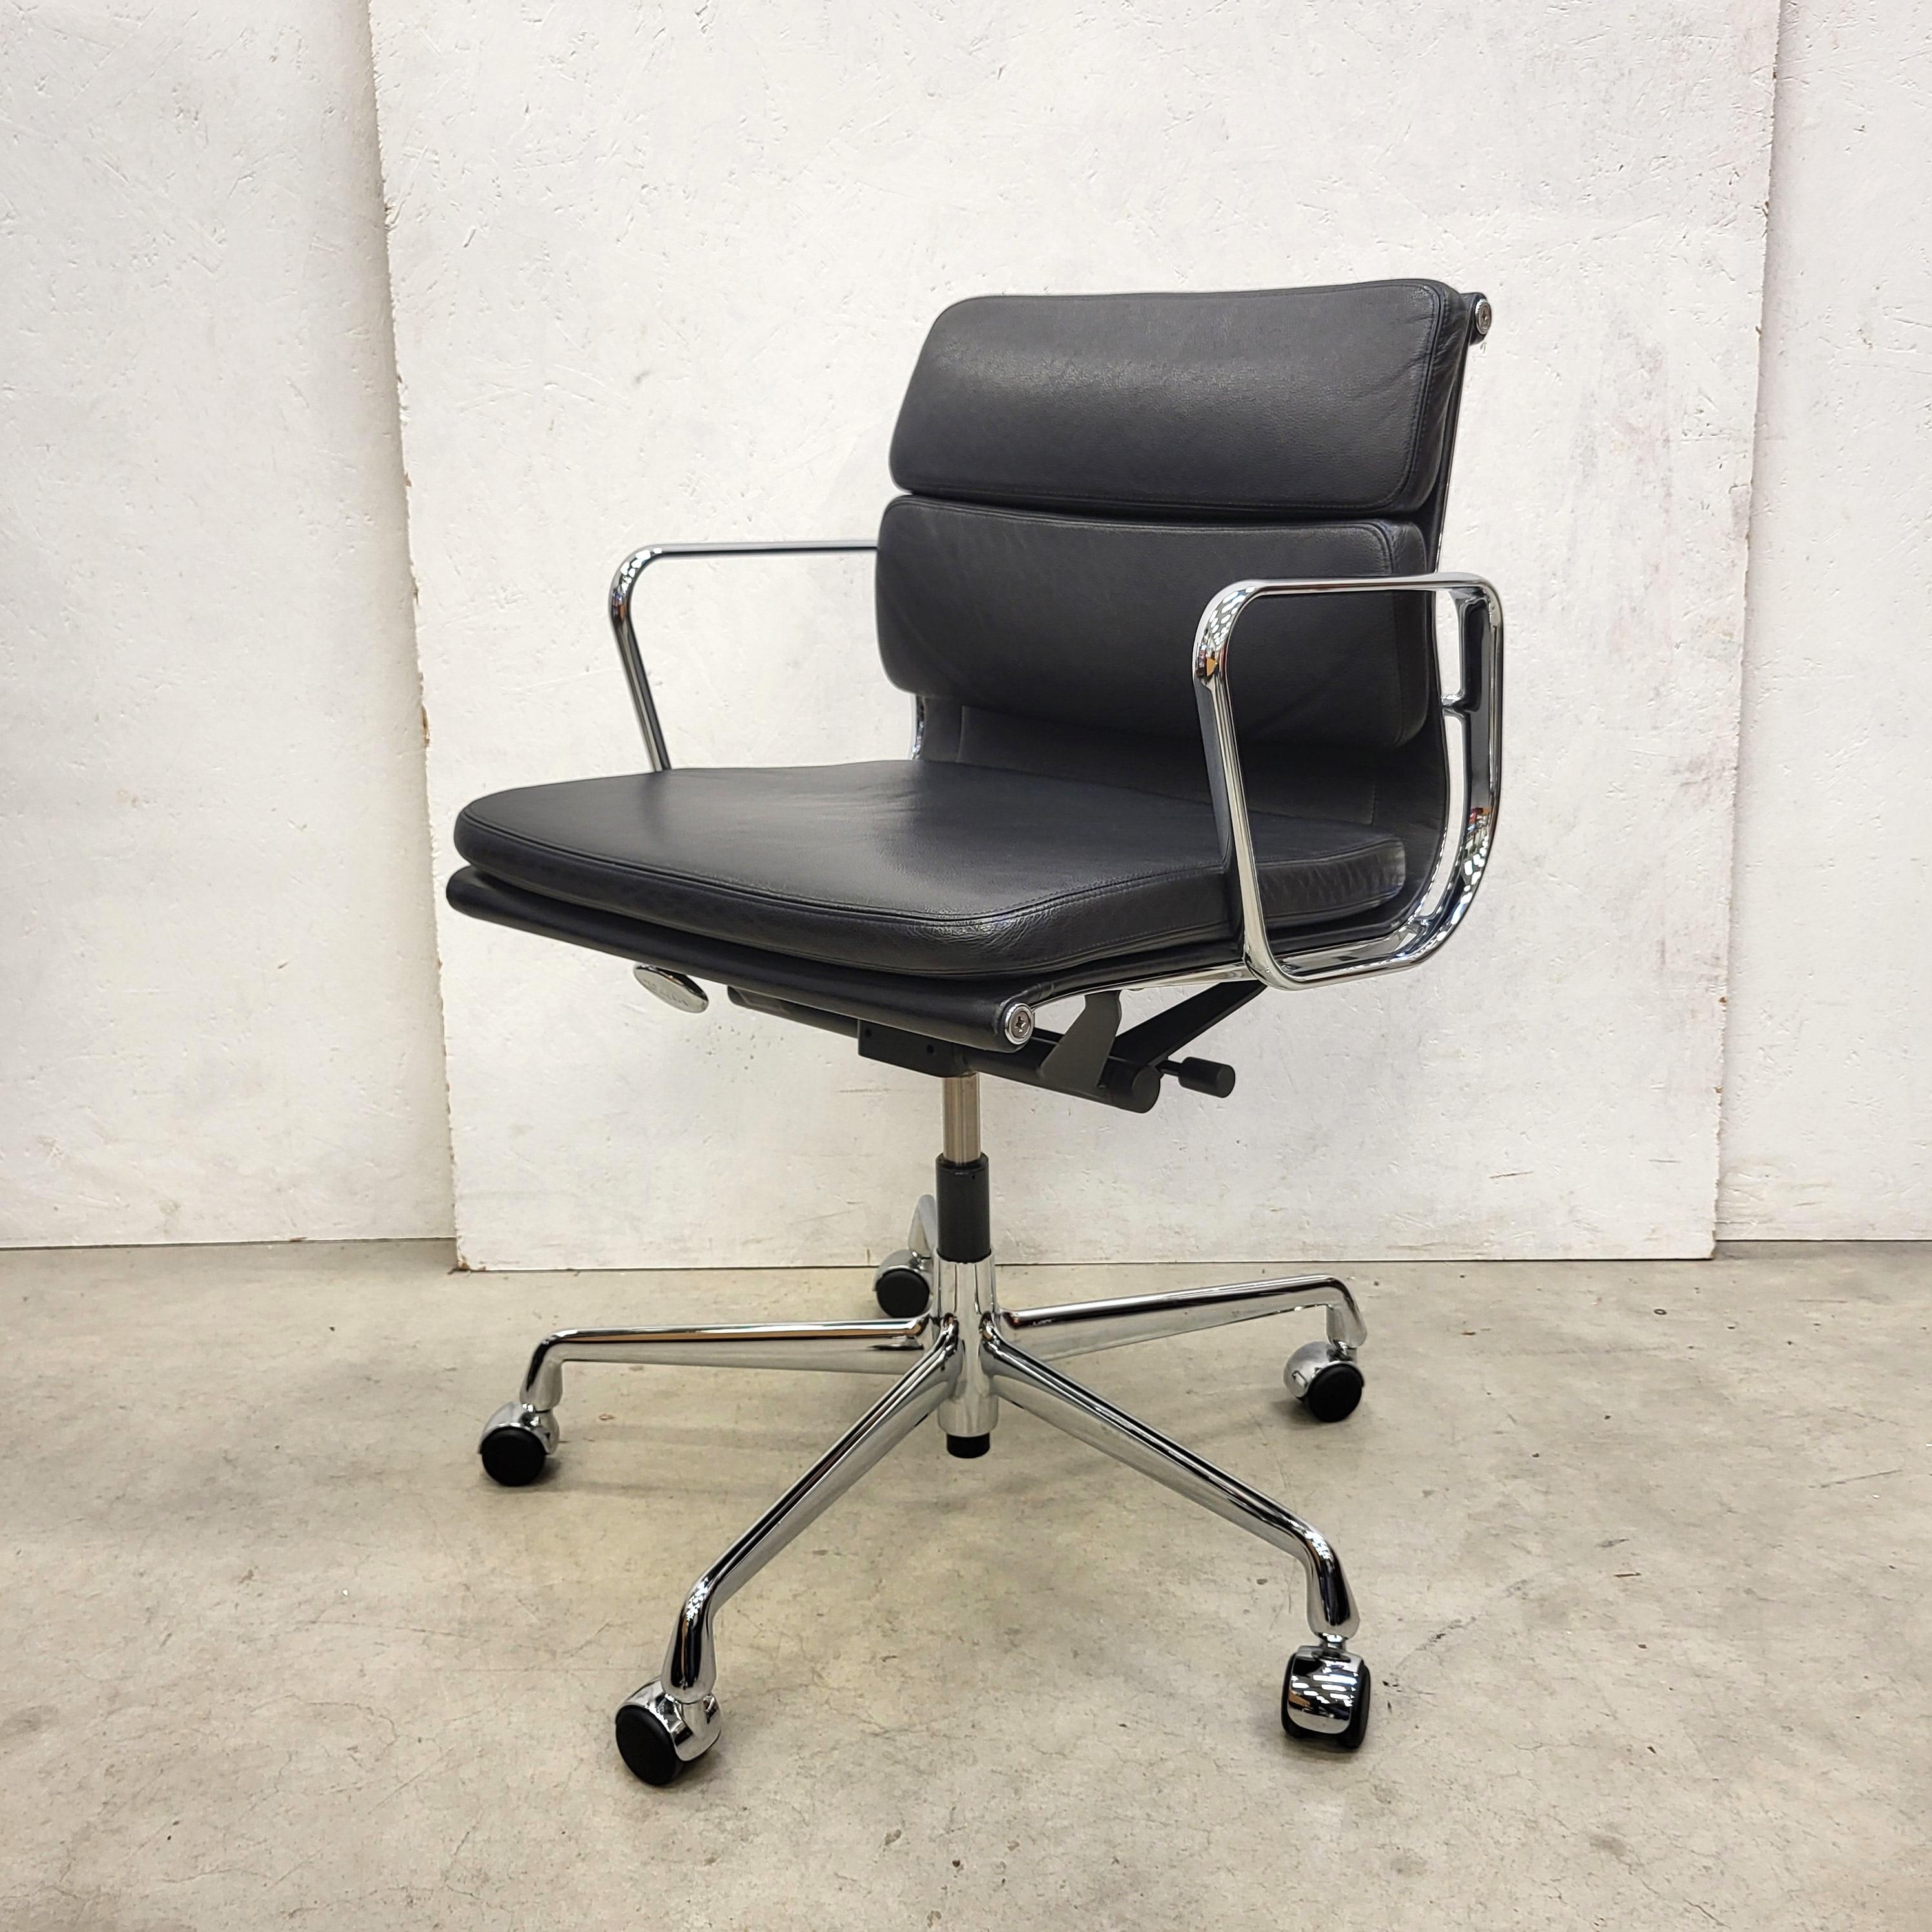 American Black Vitra EA217 Soft Pad Office Chair by Charles Eames, 2014 Model